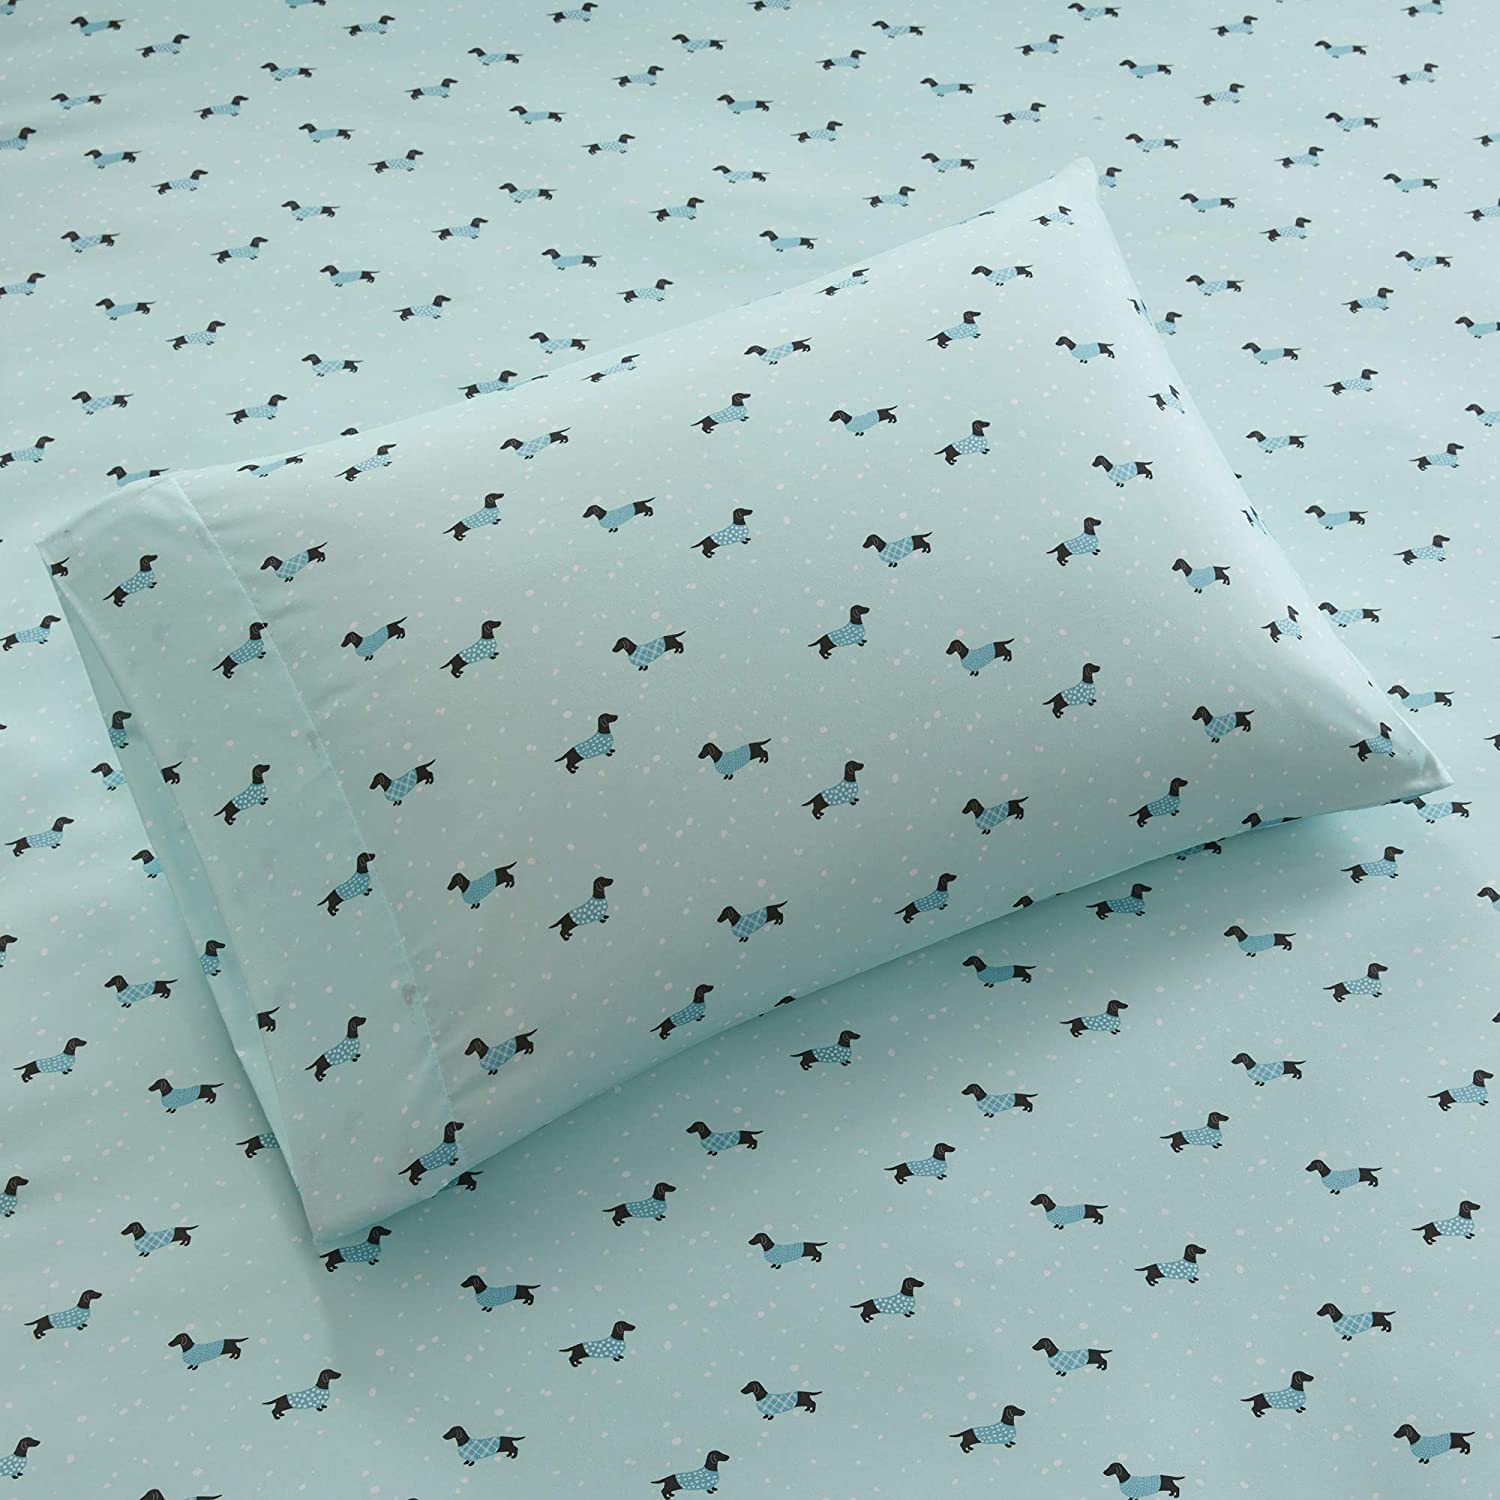 Intelligent Design Microfiber Wrinkle Resistant, Soft Sheets with 12" Pocket Modern, All Season, Cozy Bedding-Set, Matching Pillow Case, Twin XL, Novelty Aqua Dogs